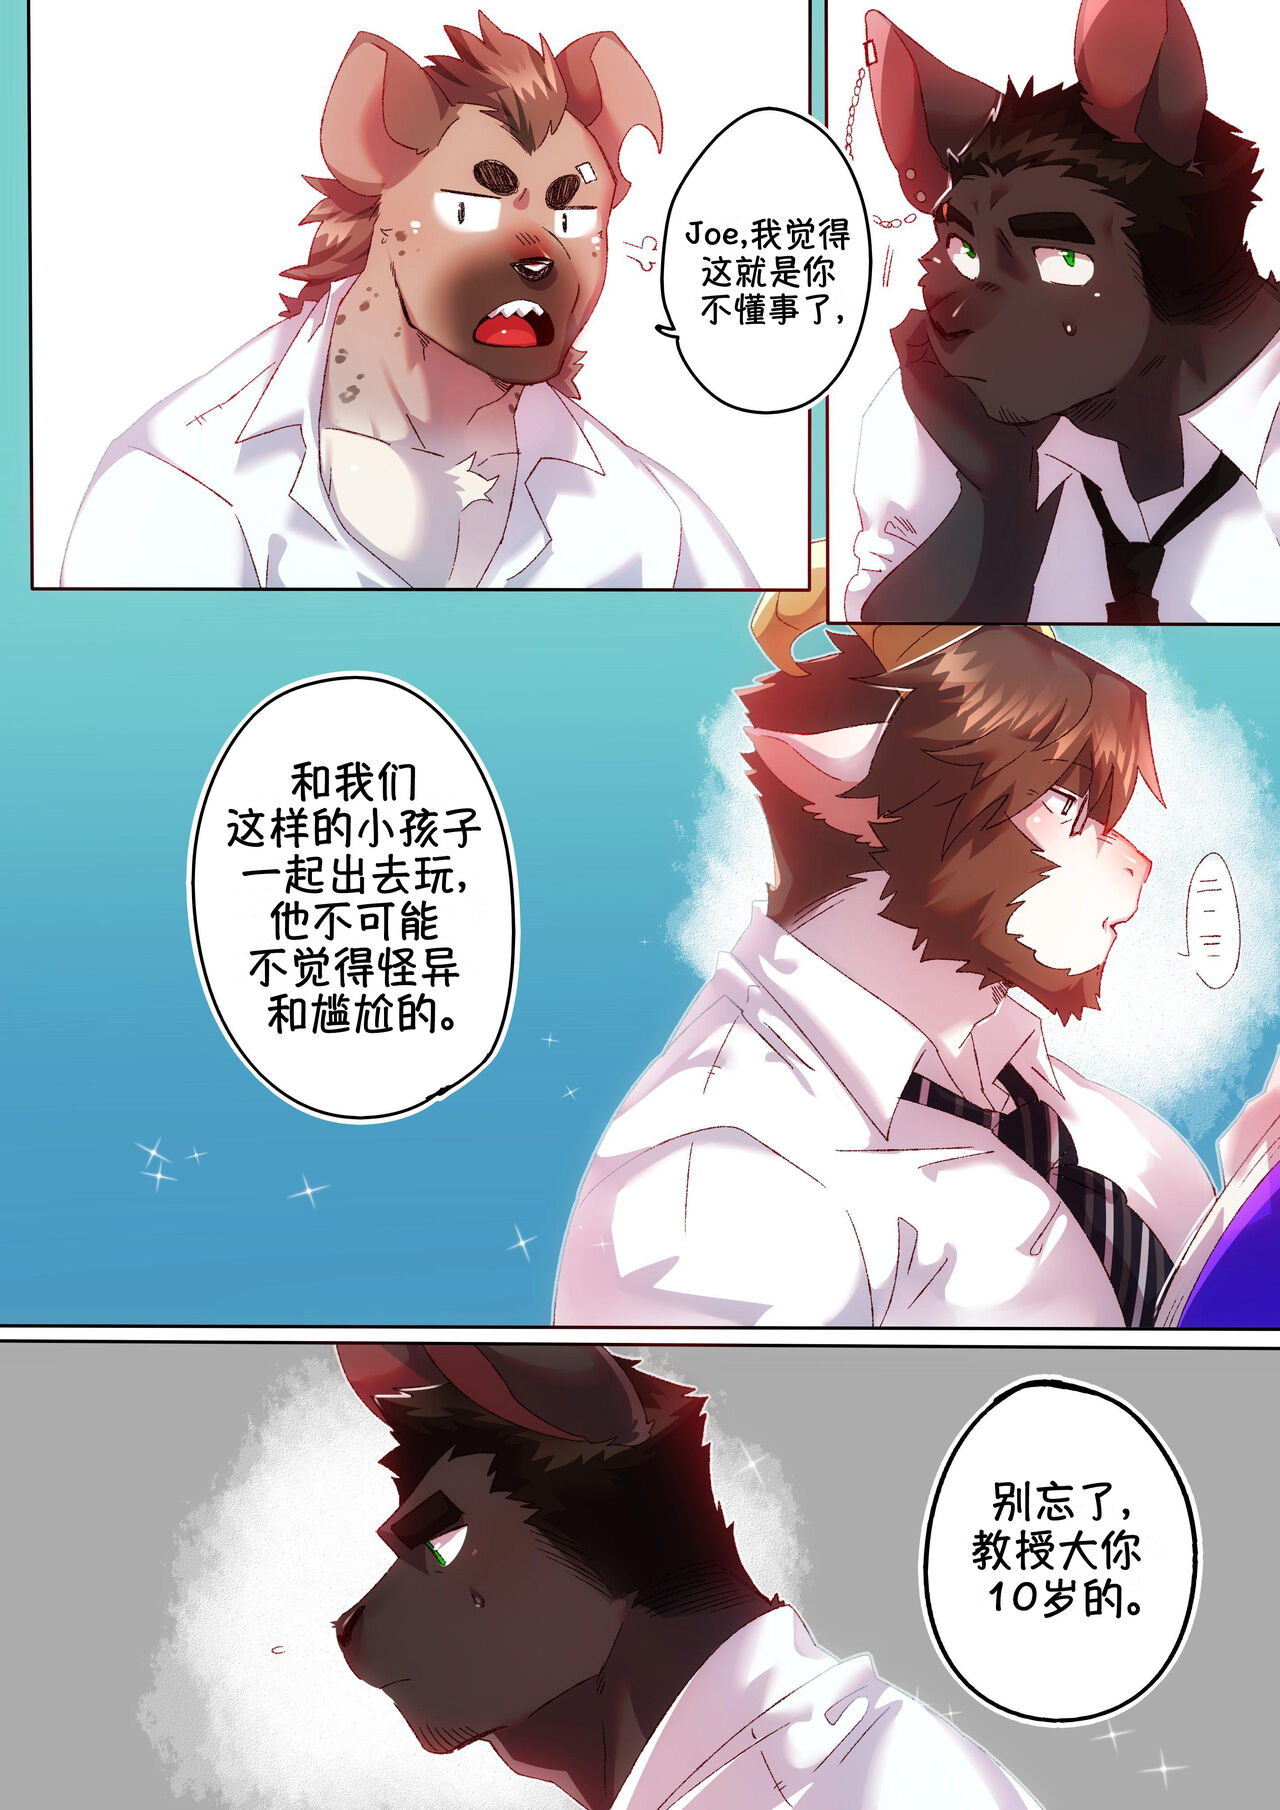 [BooBoo] Passionate Affection 深挚 [Chinese Ver.]  Ongoing 